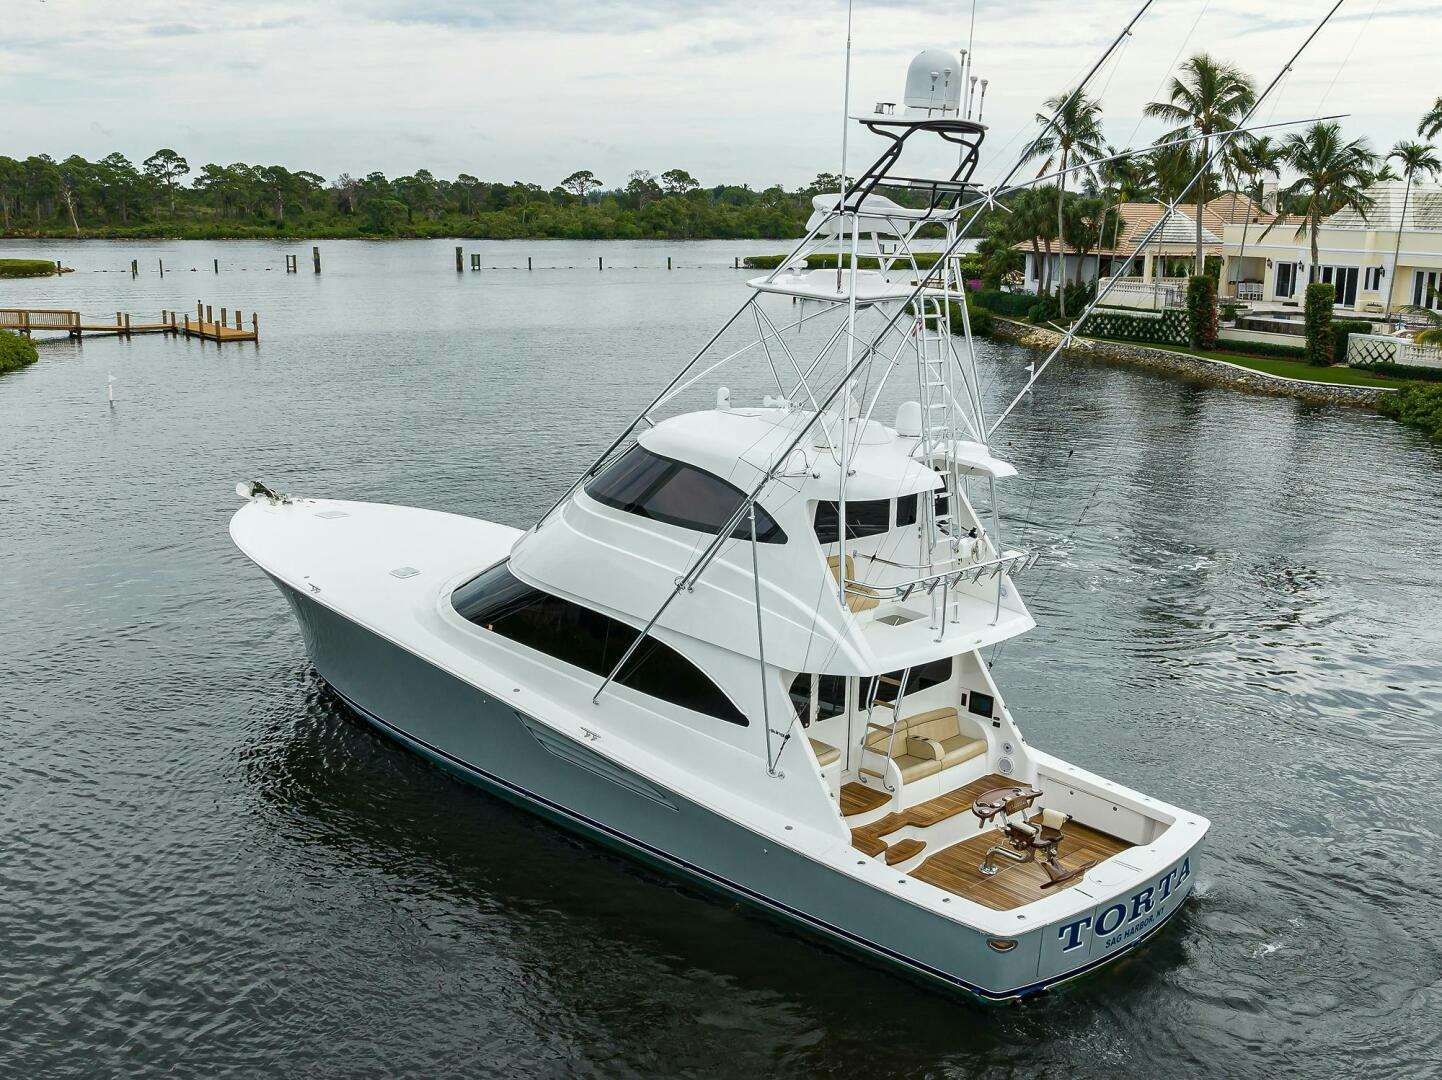 Torta
Yacht for Sale